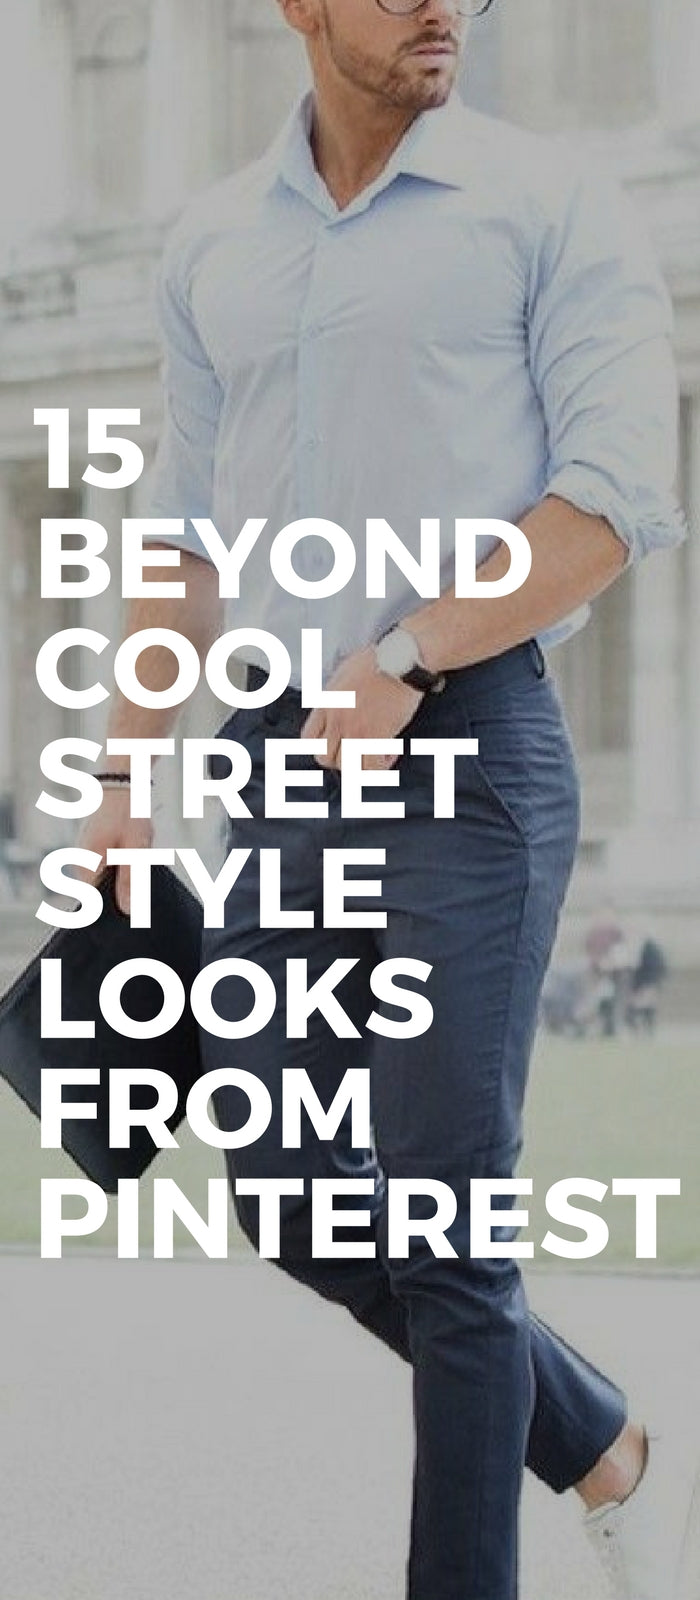 Pin on Style File: Fashion, Outfits, and Beyond!